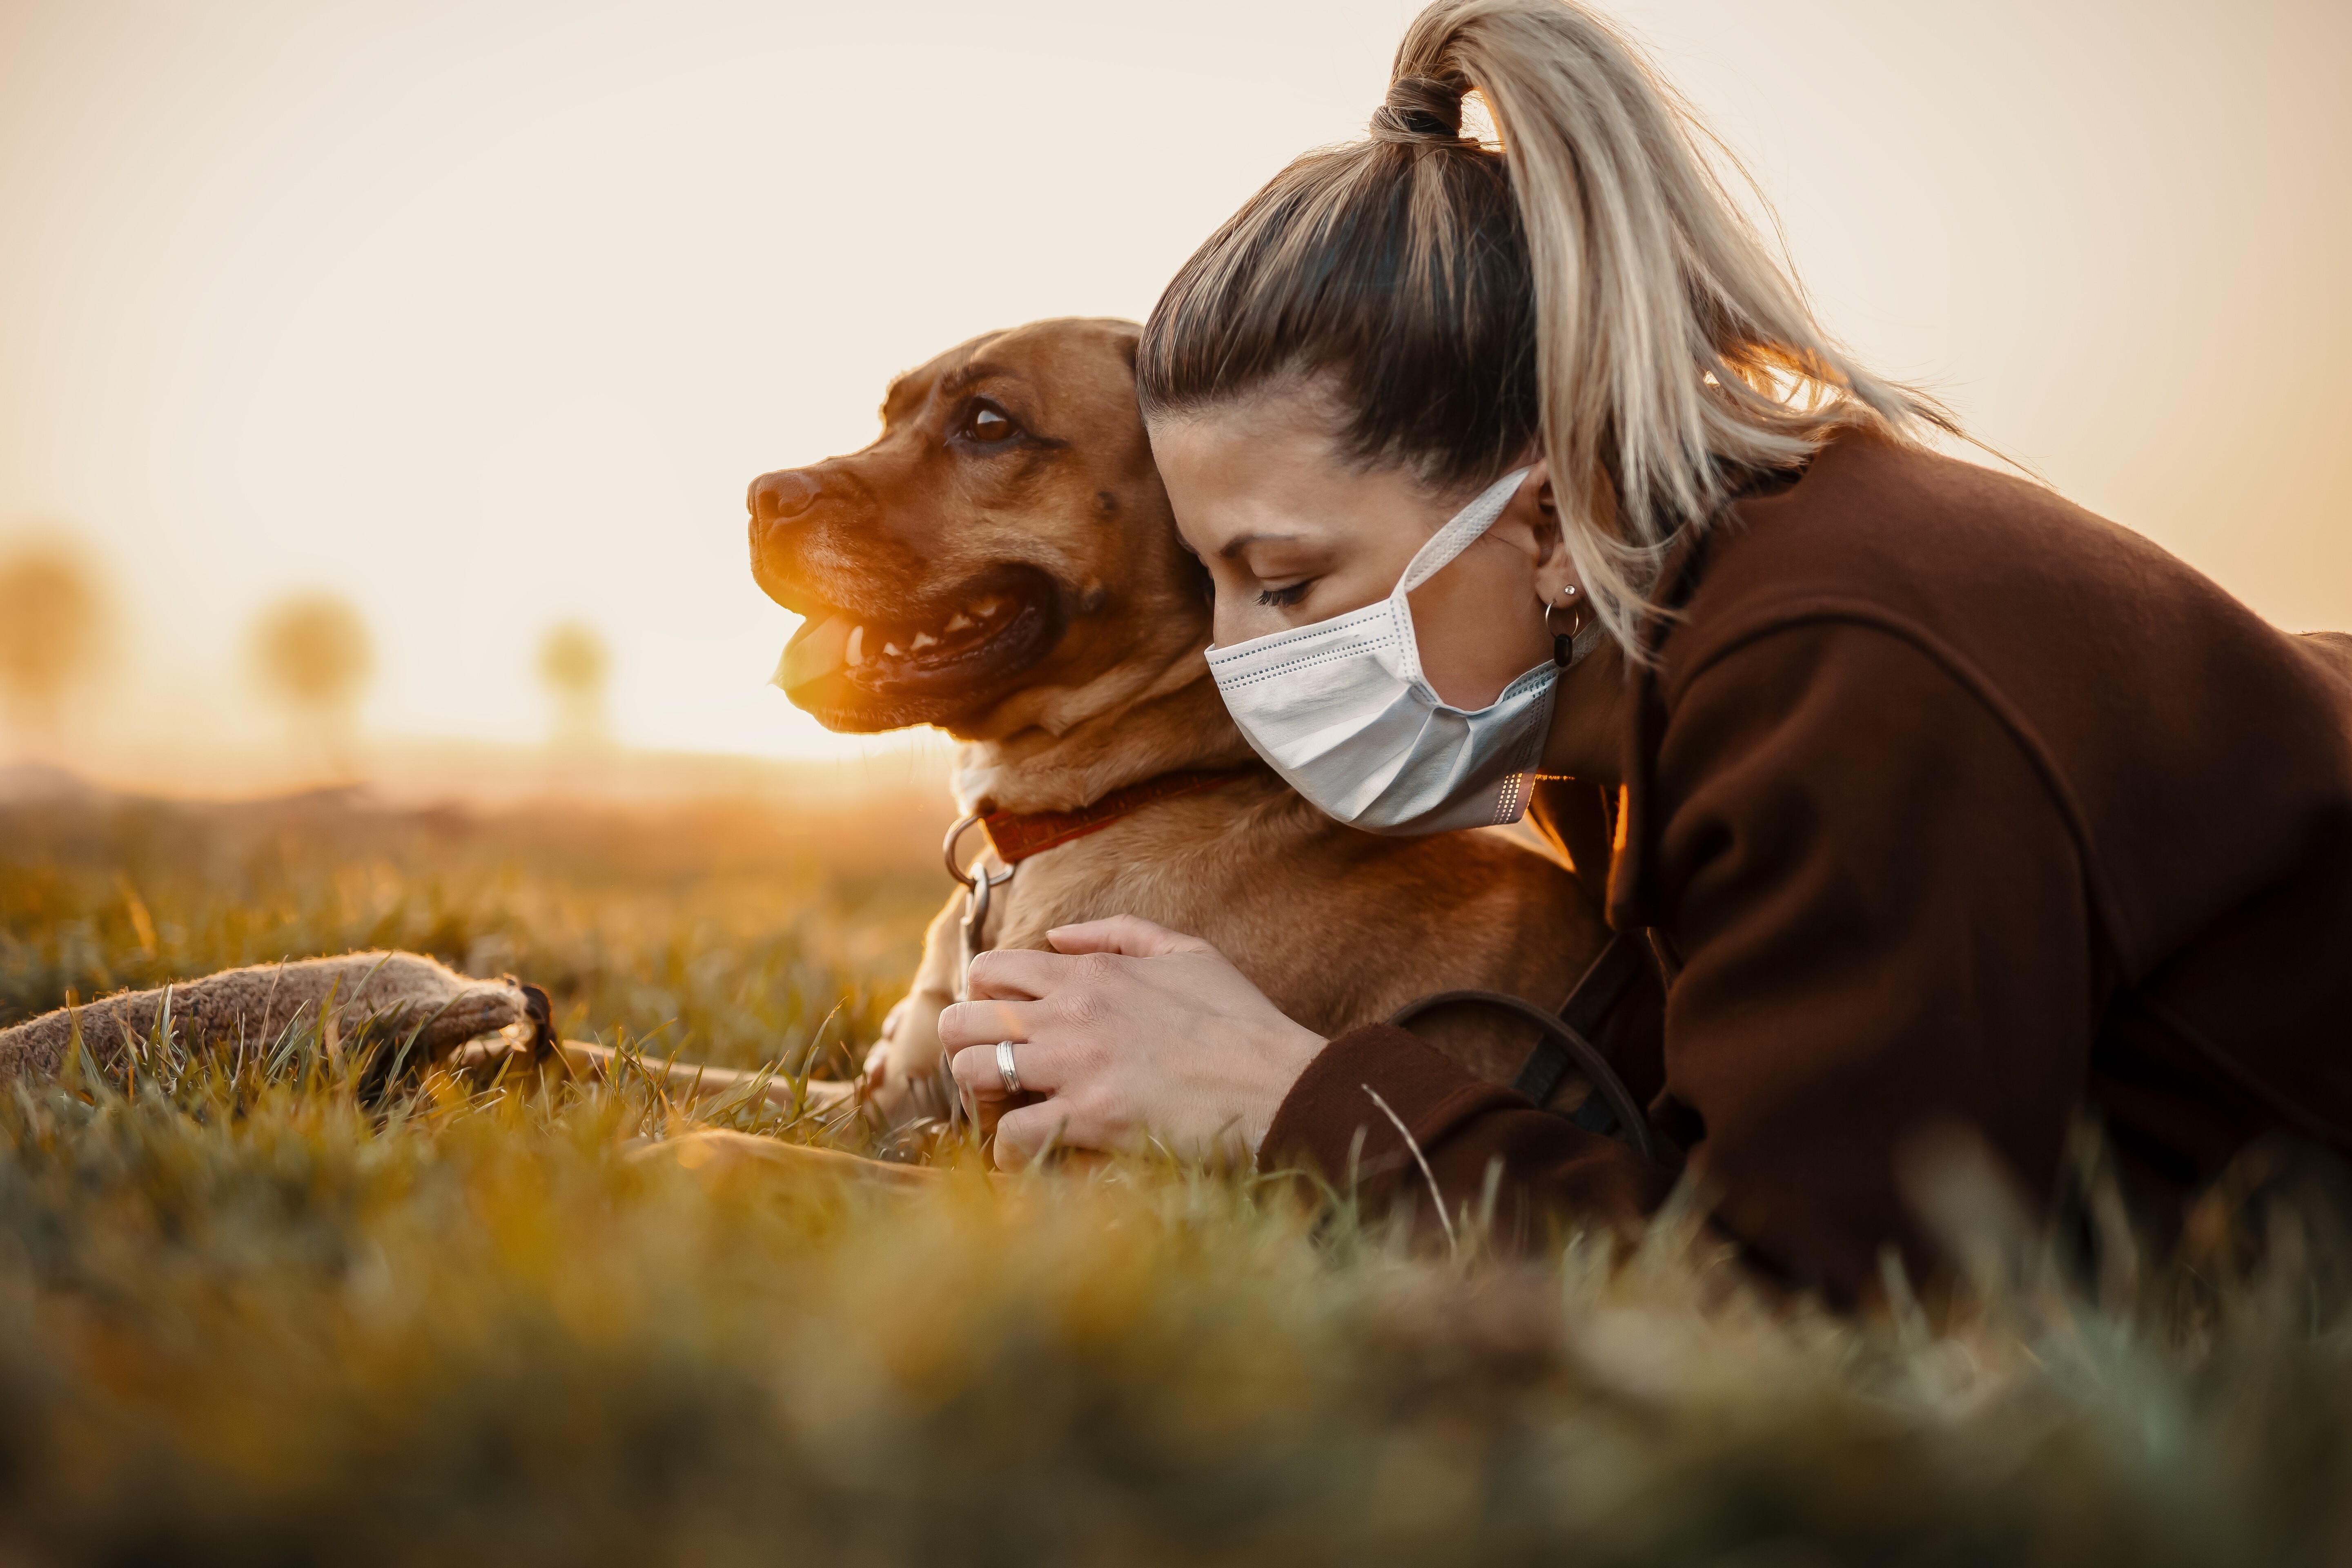 Fostering a pet benefits the animal and the person. Photo: Shutterstock